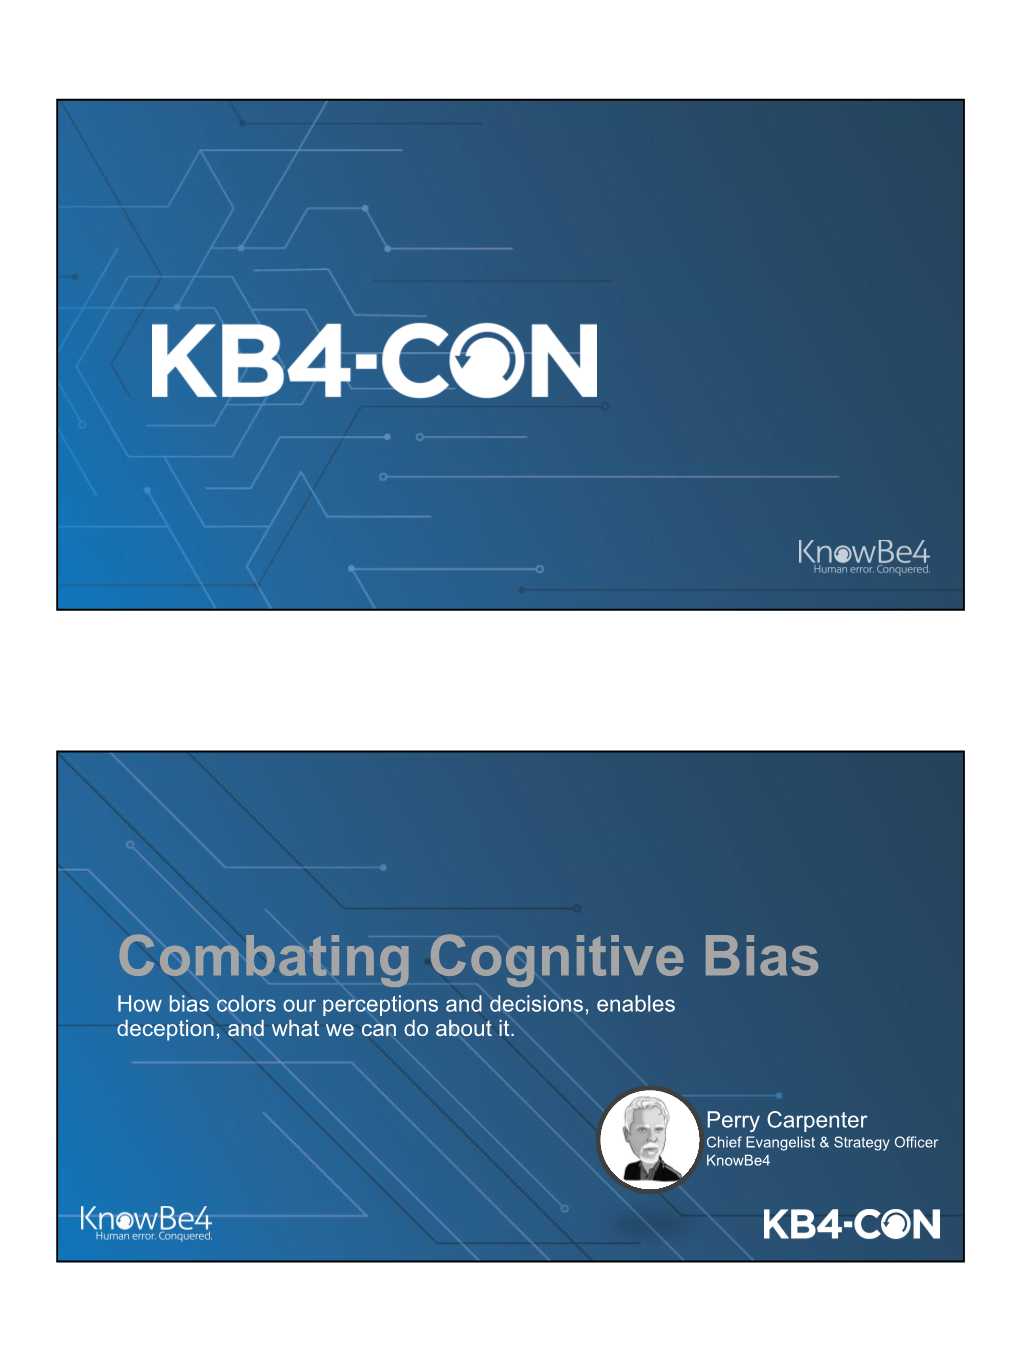 Combating Cognitive Bias How Bias Colors Our Perceptions and Decisions, Enables Deception, and What We Can Do About It